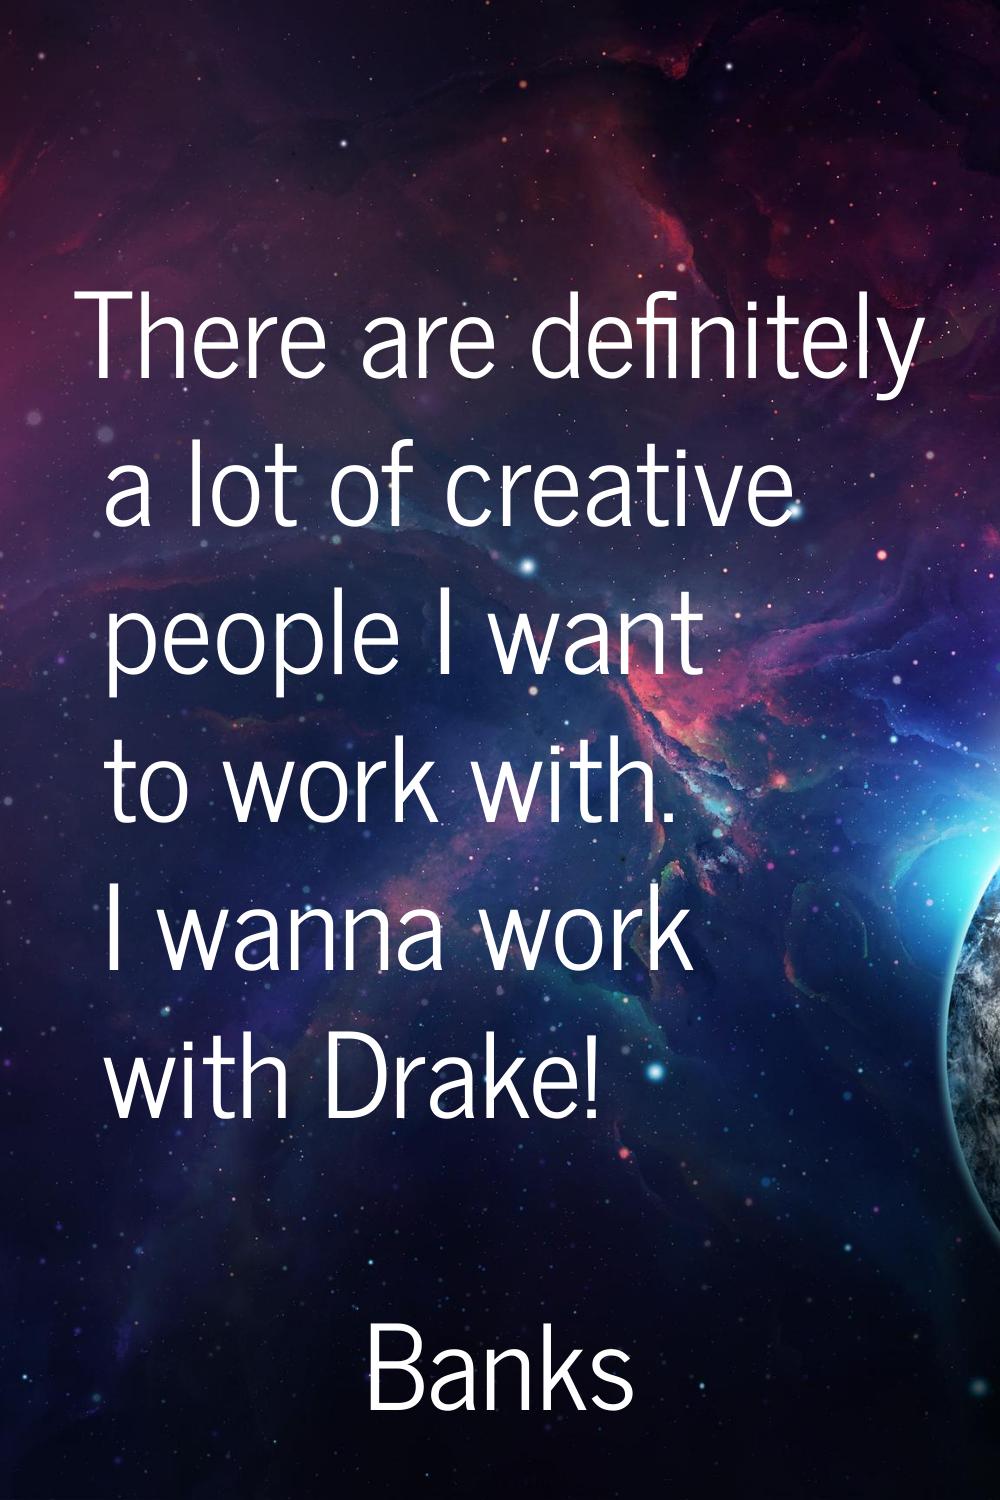 There are definitely a lot of creative people I want to work with. I wanna work with Drake!